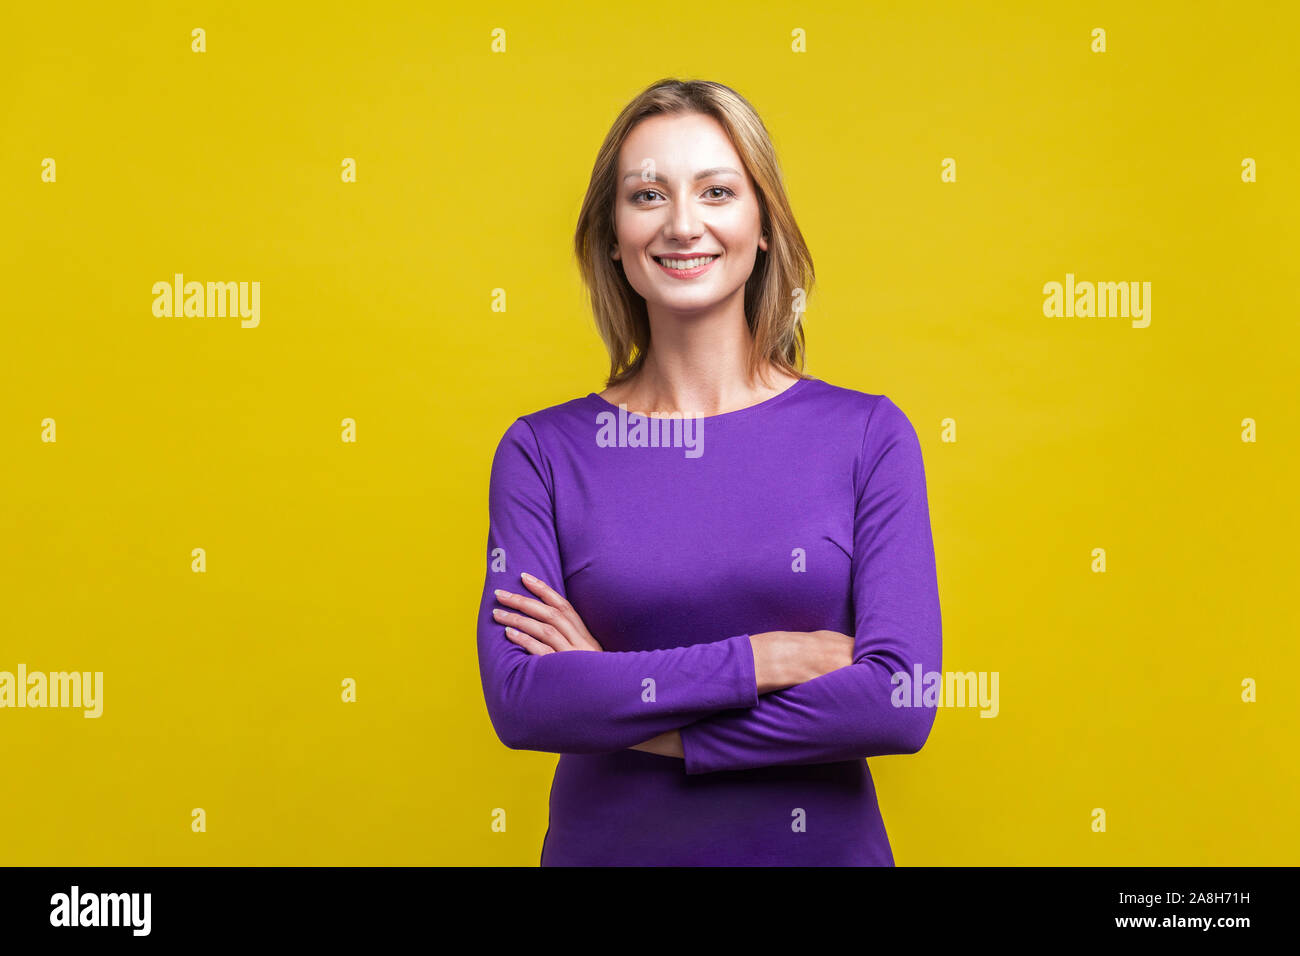 Portrait of happy successful businesswoman in tight purple dress standing with crossed hands, looking at camera with charming and joyous toothy smile. Stock Photo